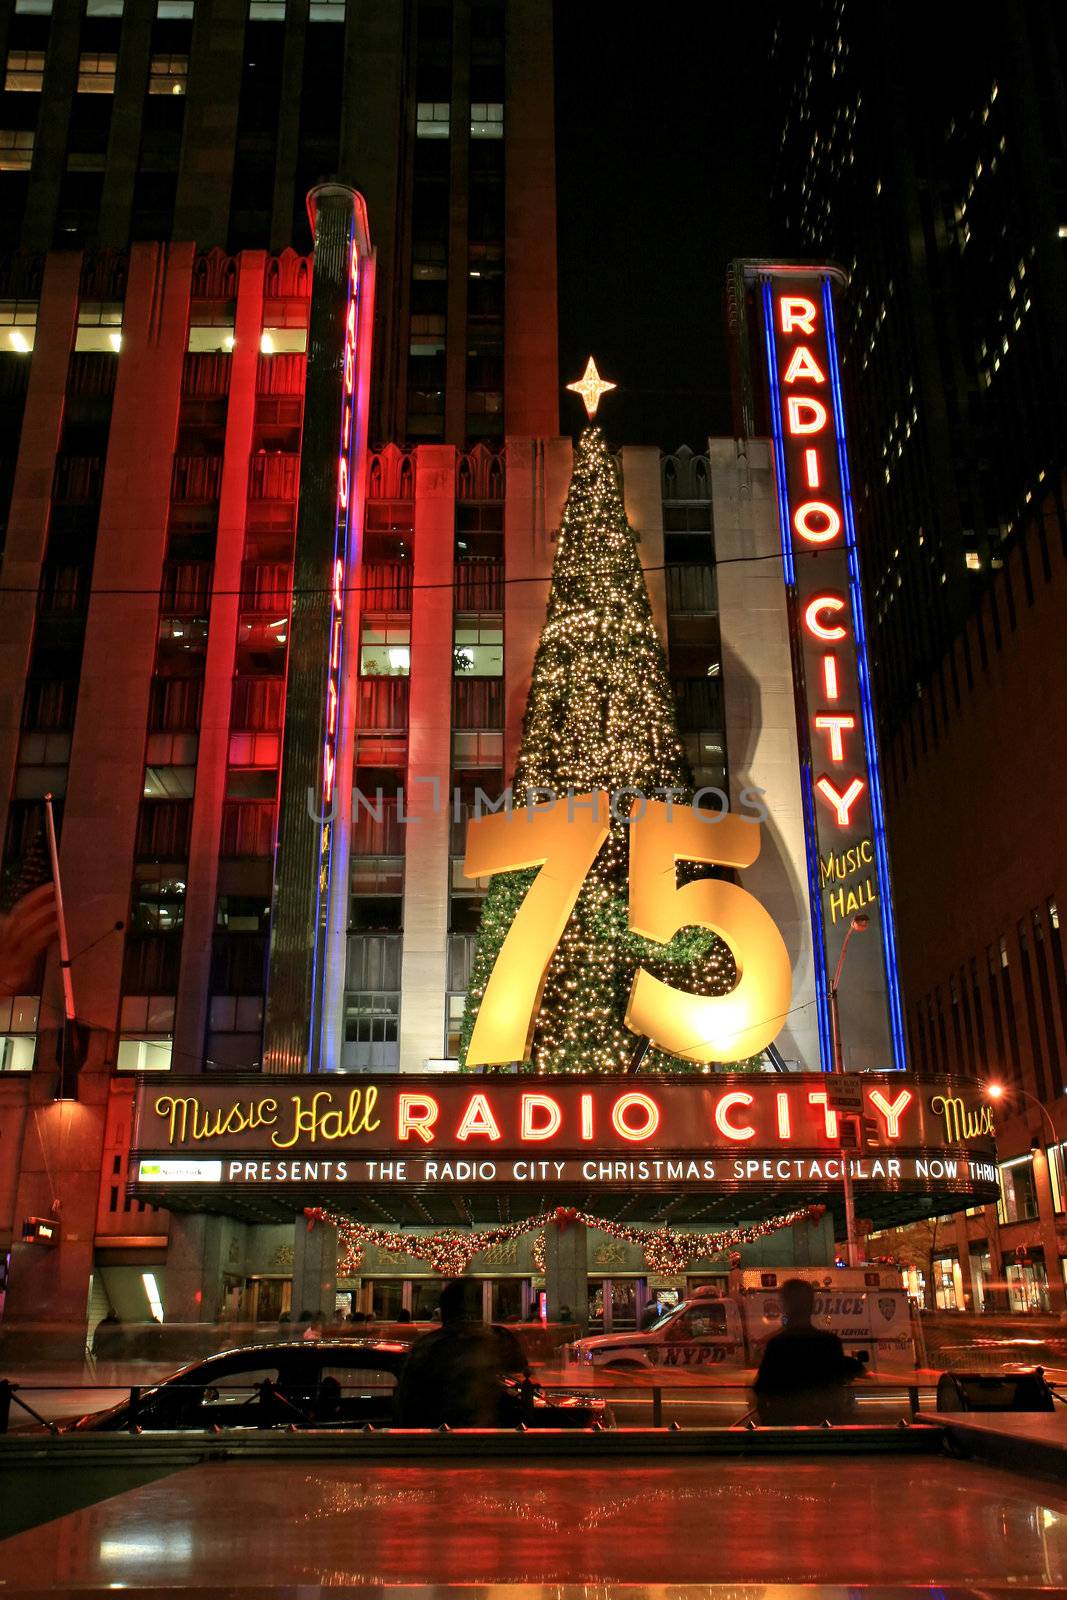 The famous Radio City Music Hall in Midtown Manhattan NYC 